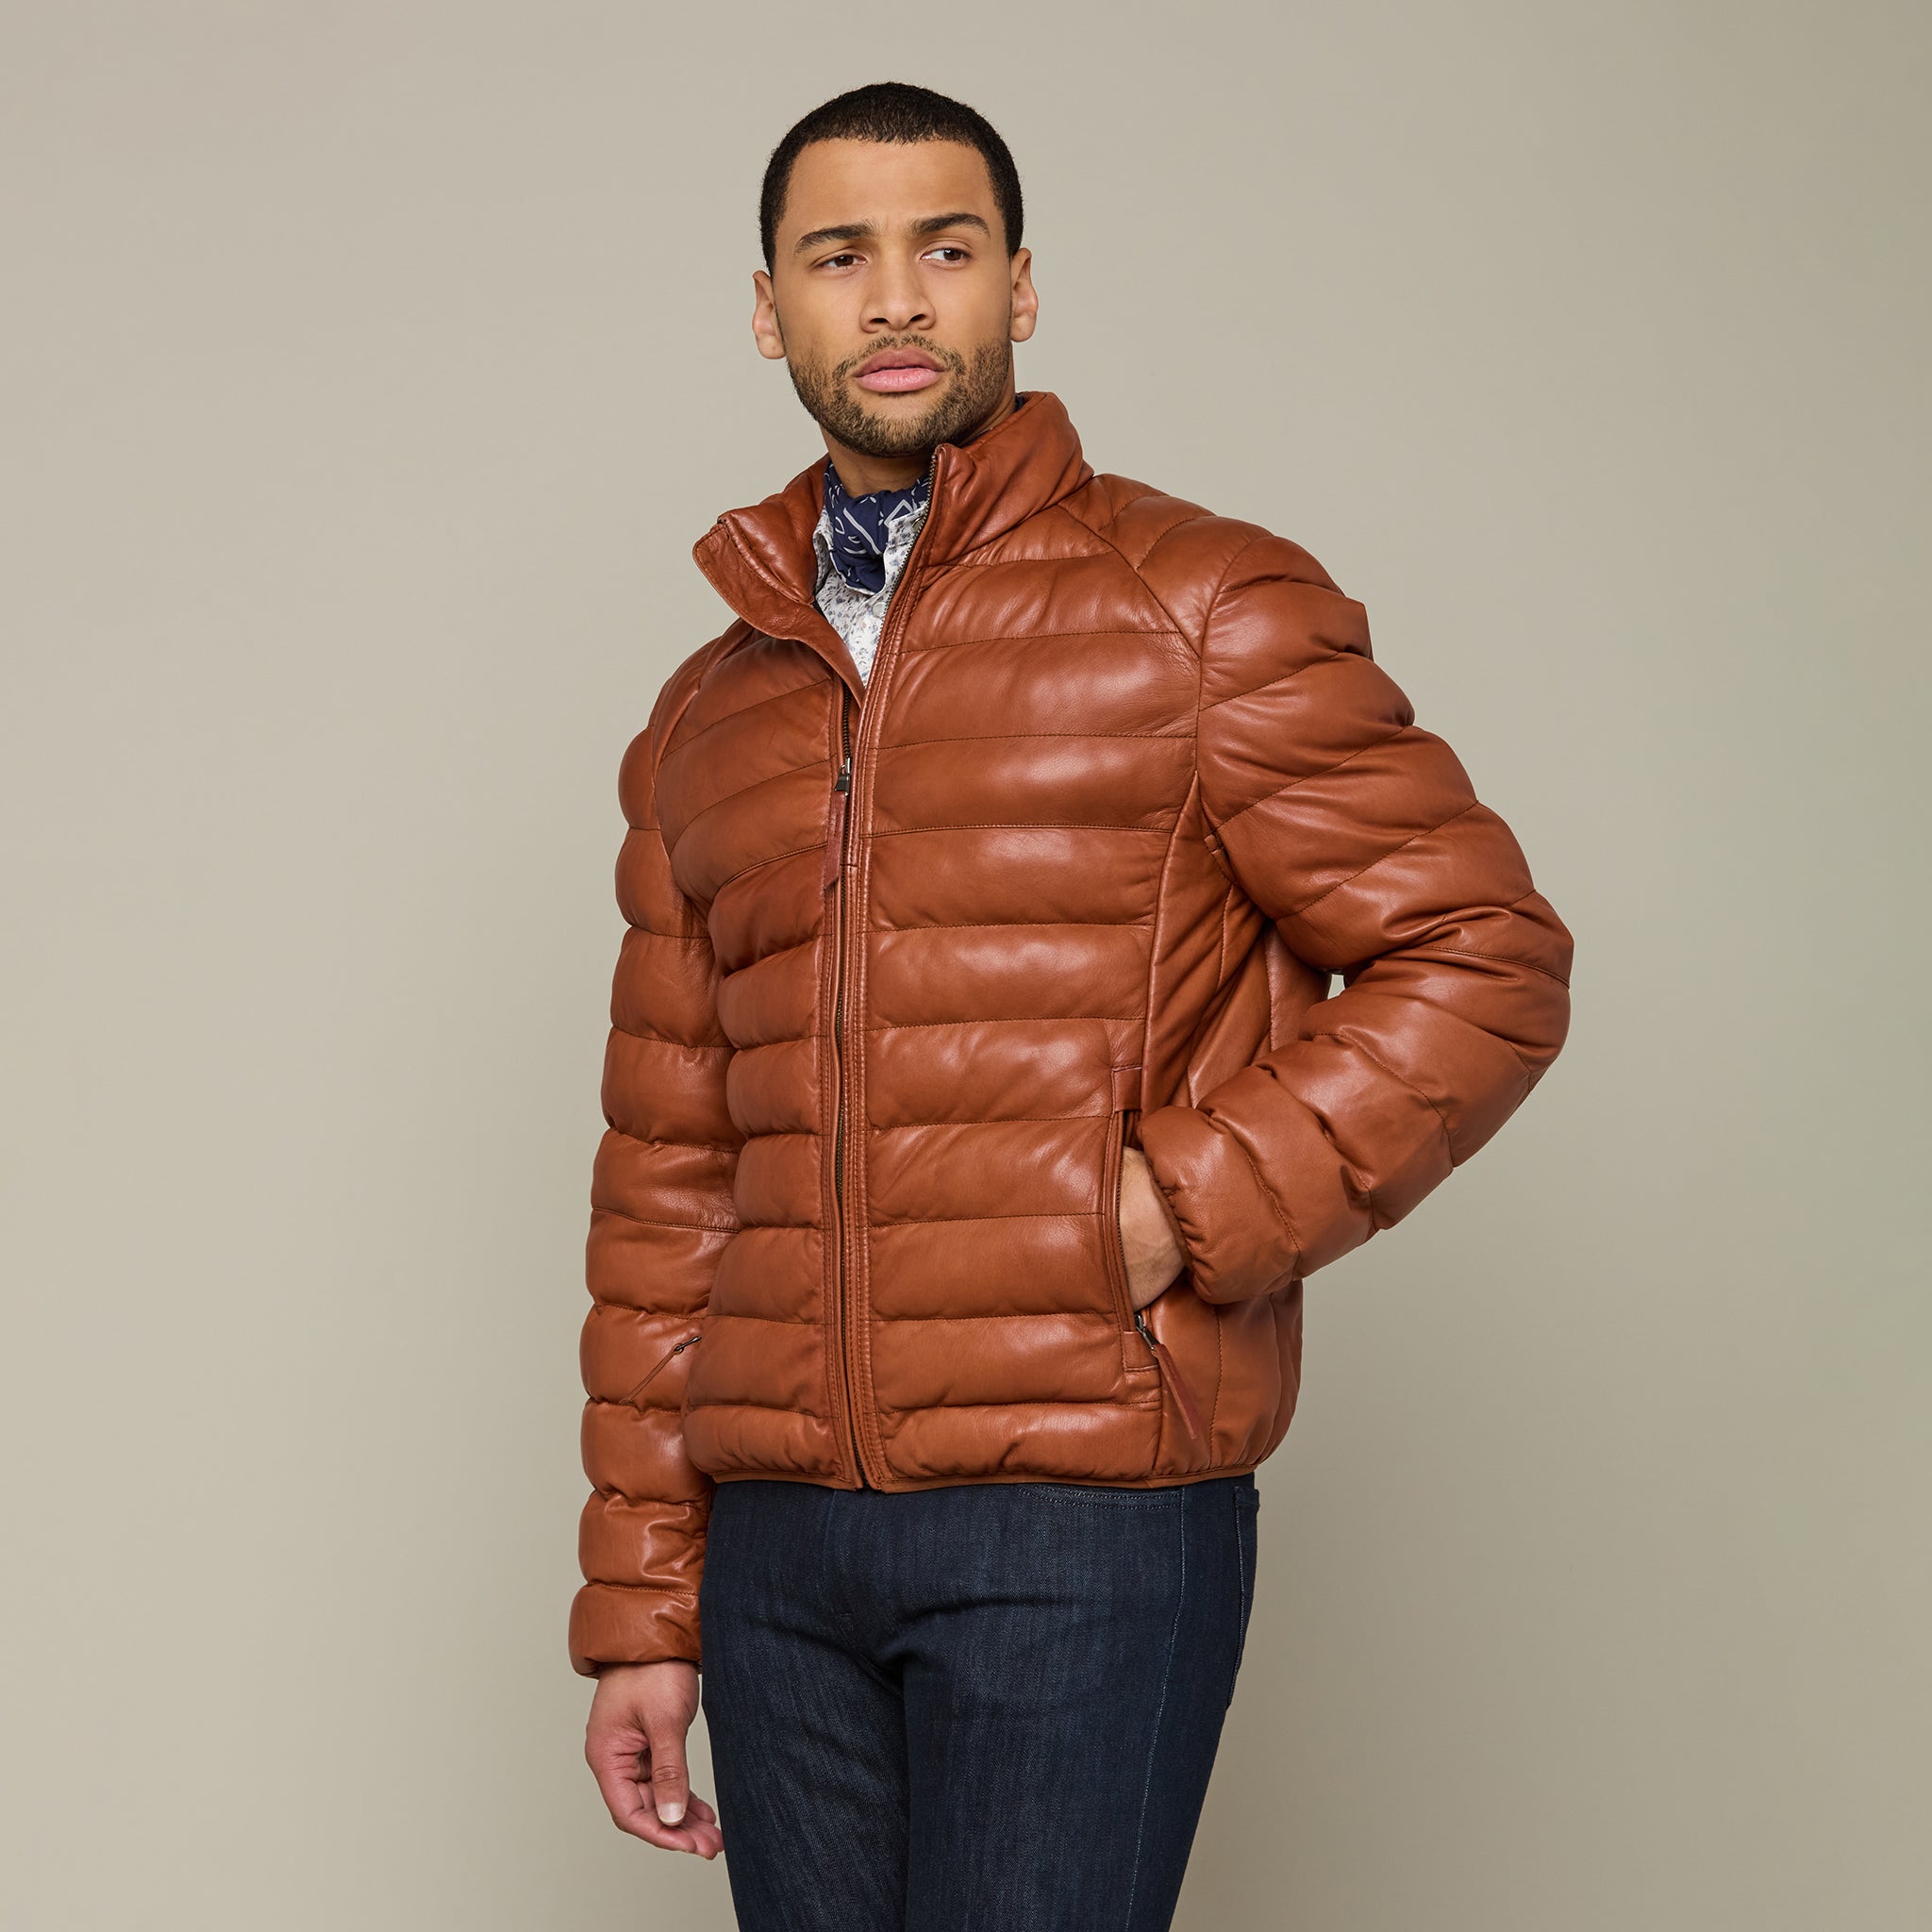 LCMTWX Mens Puffer Jackets Coat Button Solid Color Jacket Leather